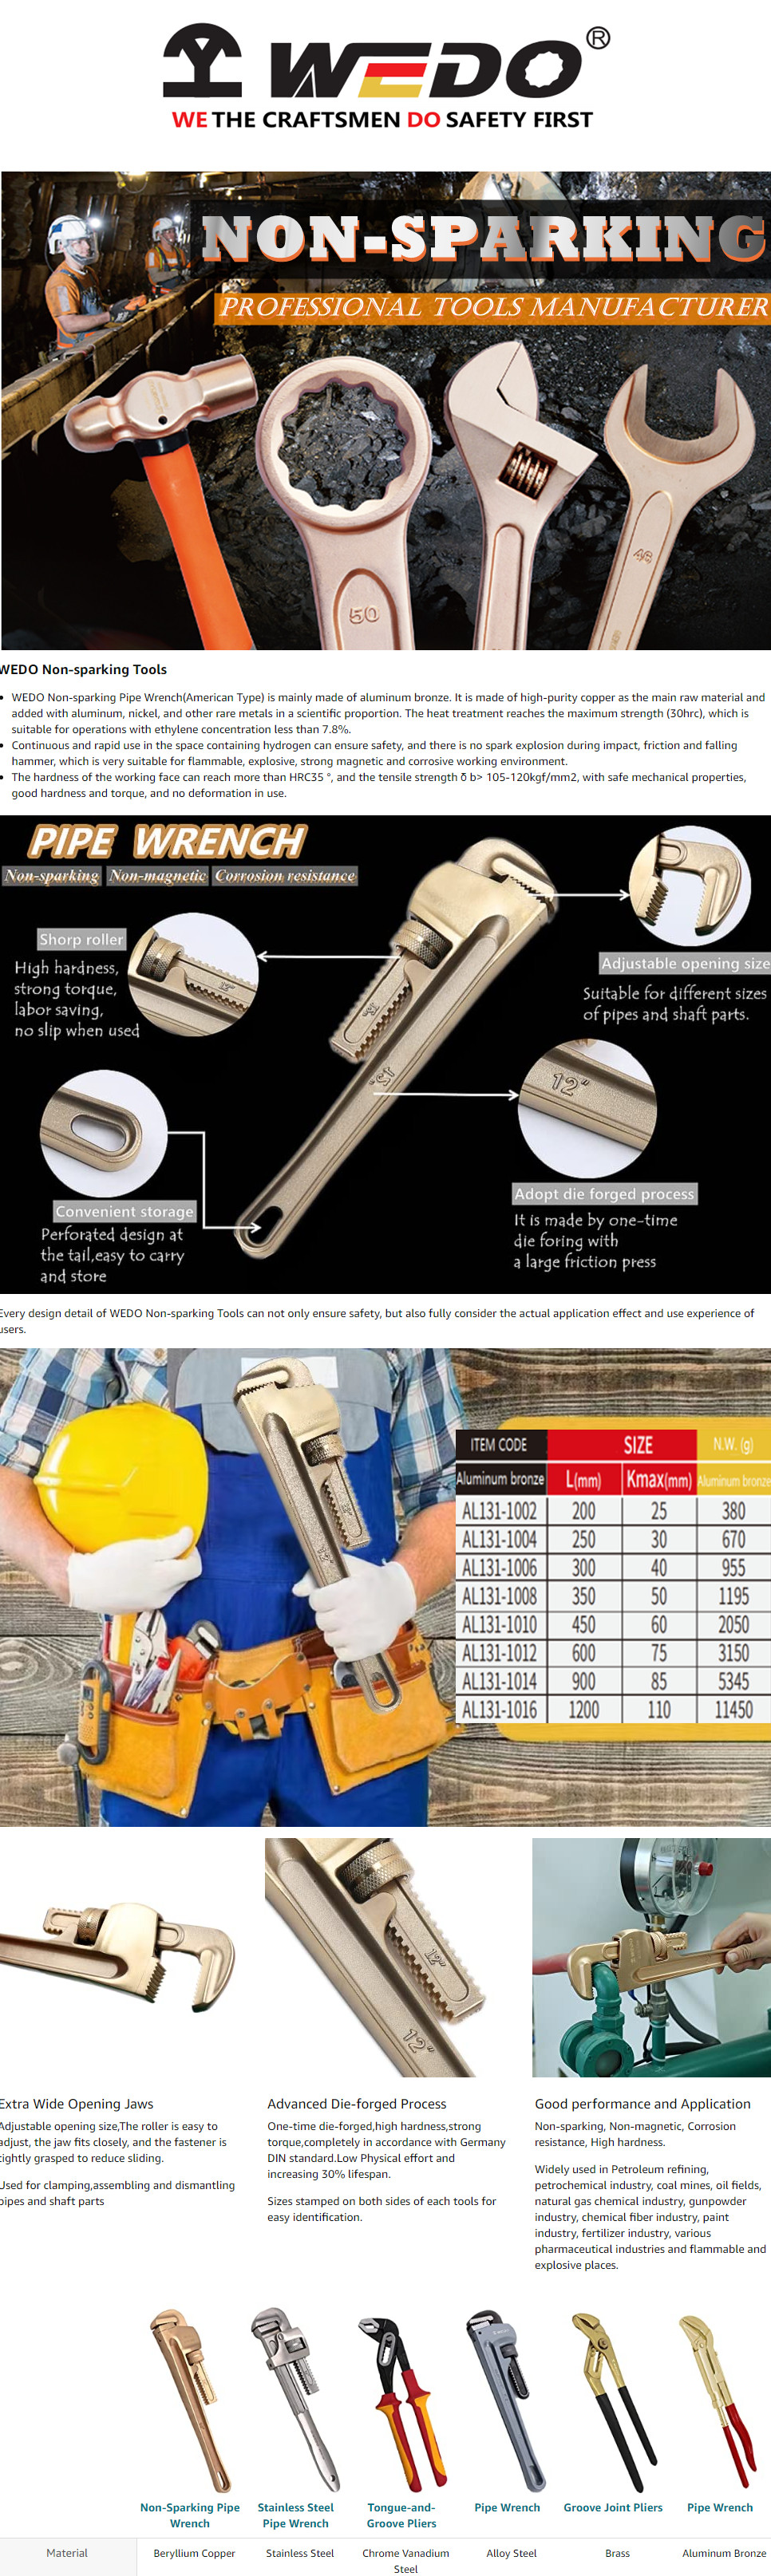 WEDO Non-Sparking Pipe Wrench, Spark-free Safety Monkey Wrench, Aluminum  Bronze,DIN Standard, BAM & FM Certificate，9.4'',240mm*45mm